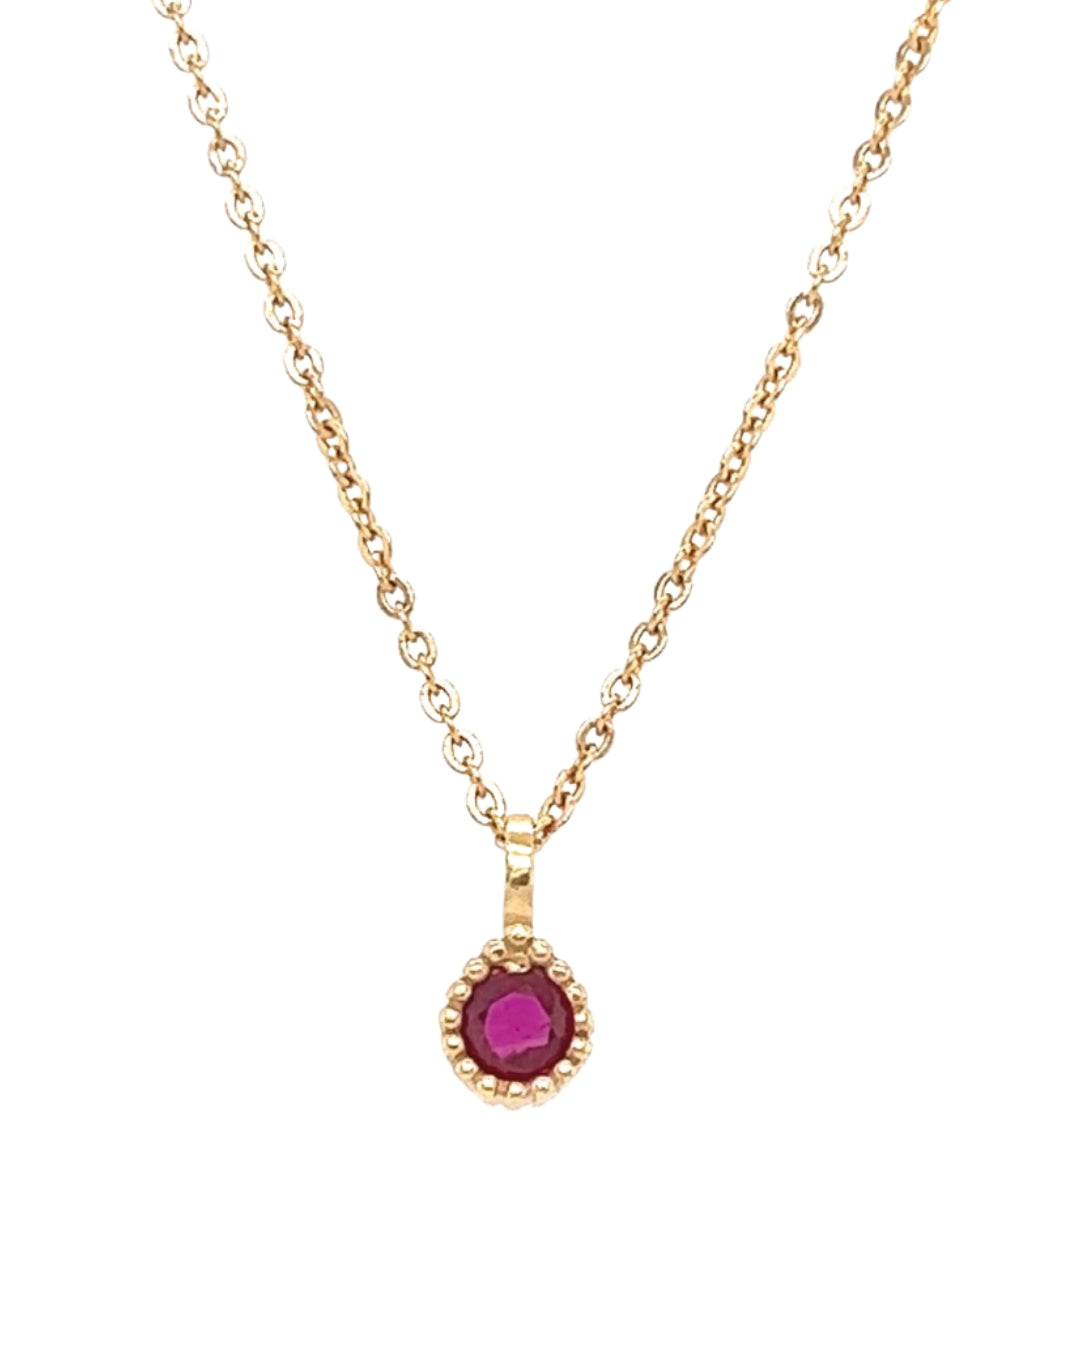 Gold July Birthstone Necklace in Ruby cubic zirconia crystal with a milgrain border. Available in all 12 birthstone months. 